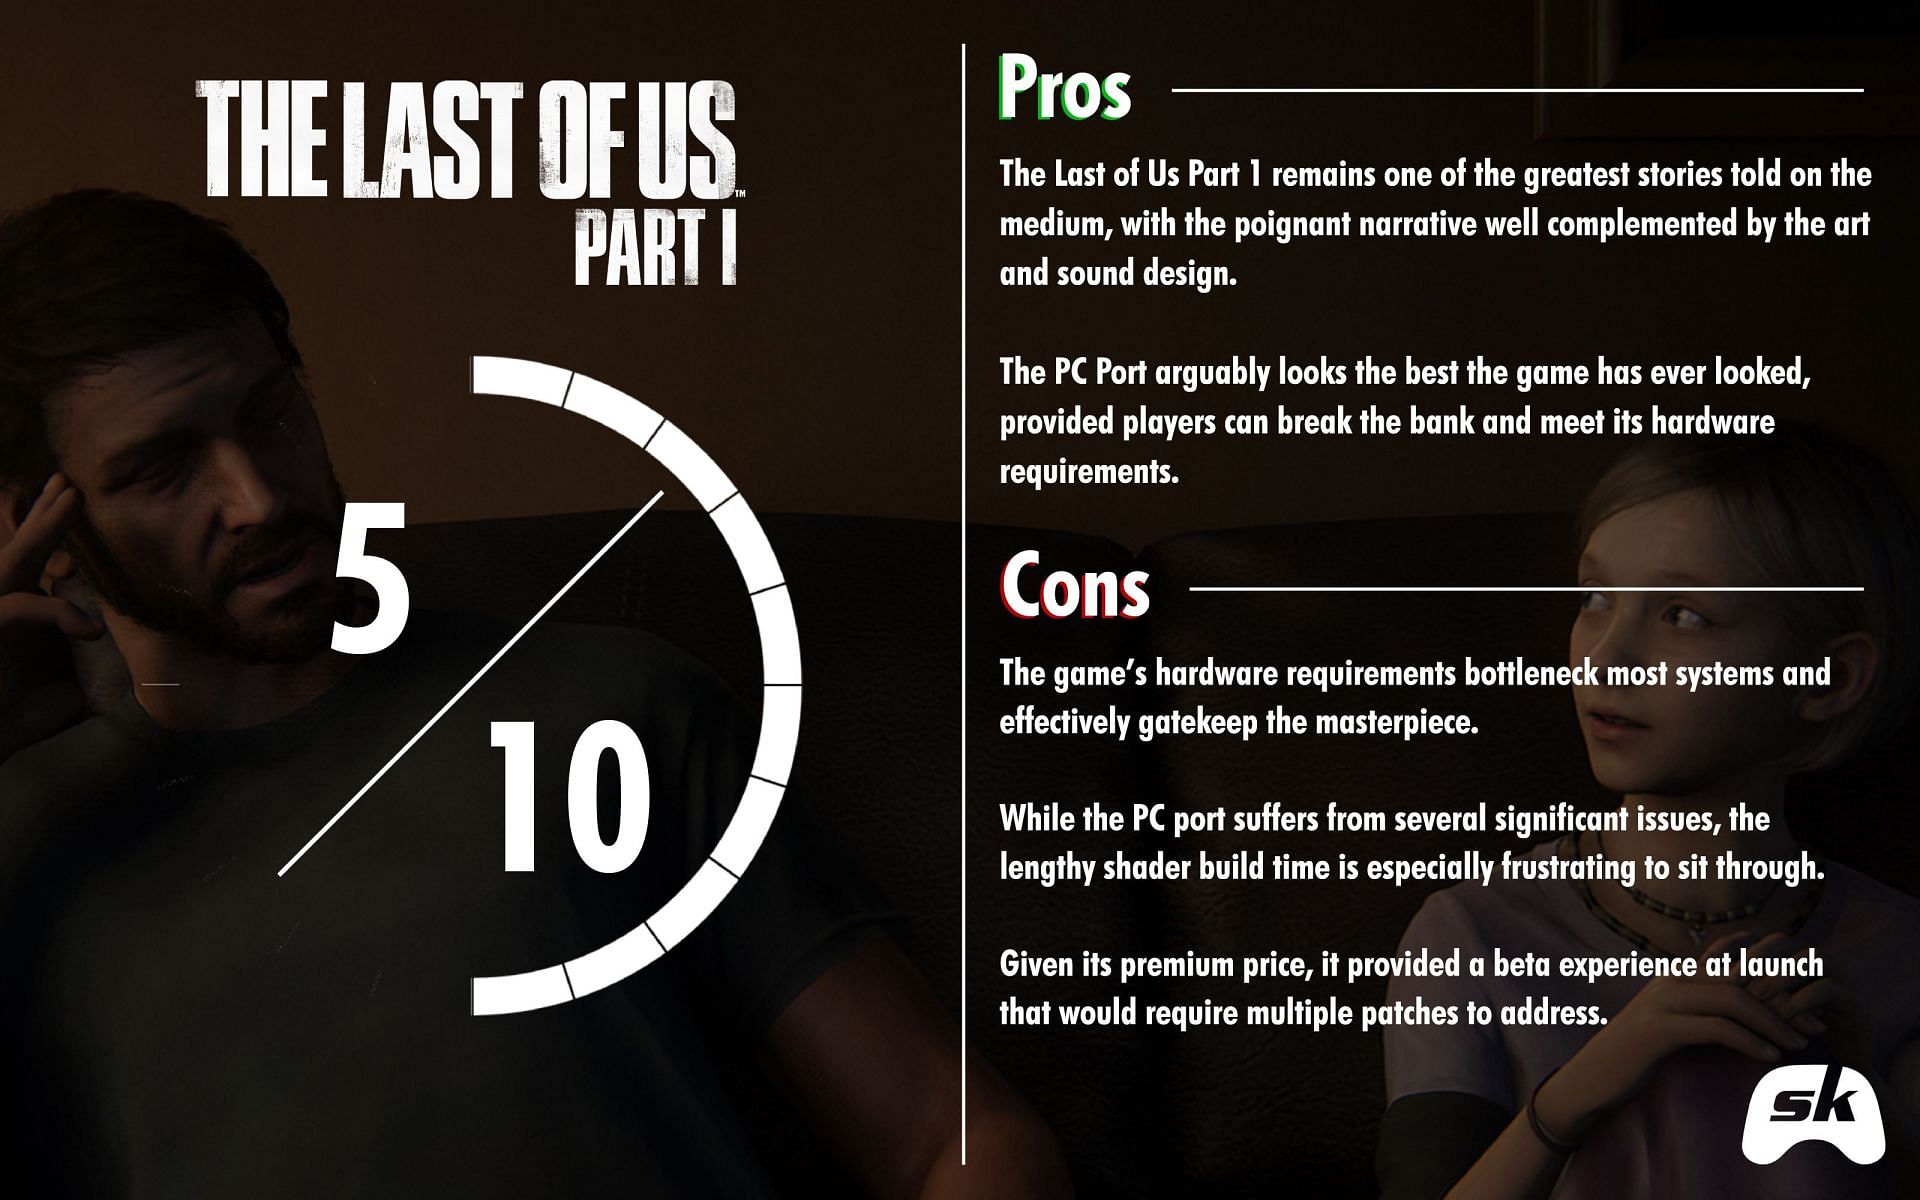 The Last of Us Part I PC review: An unfinished port of a decade